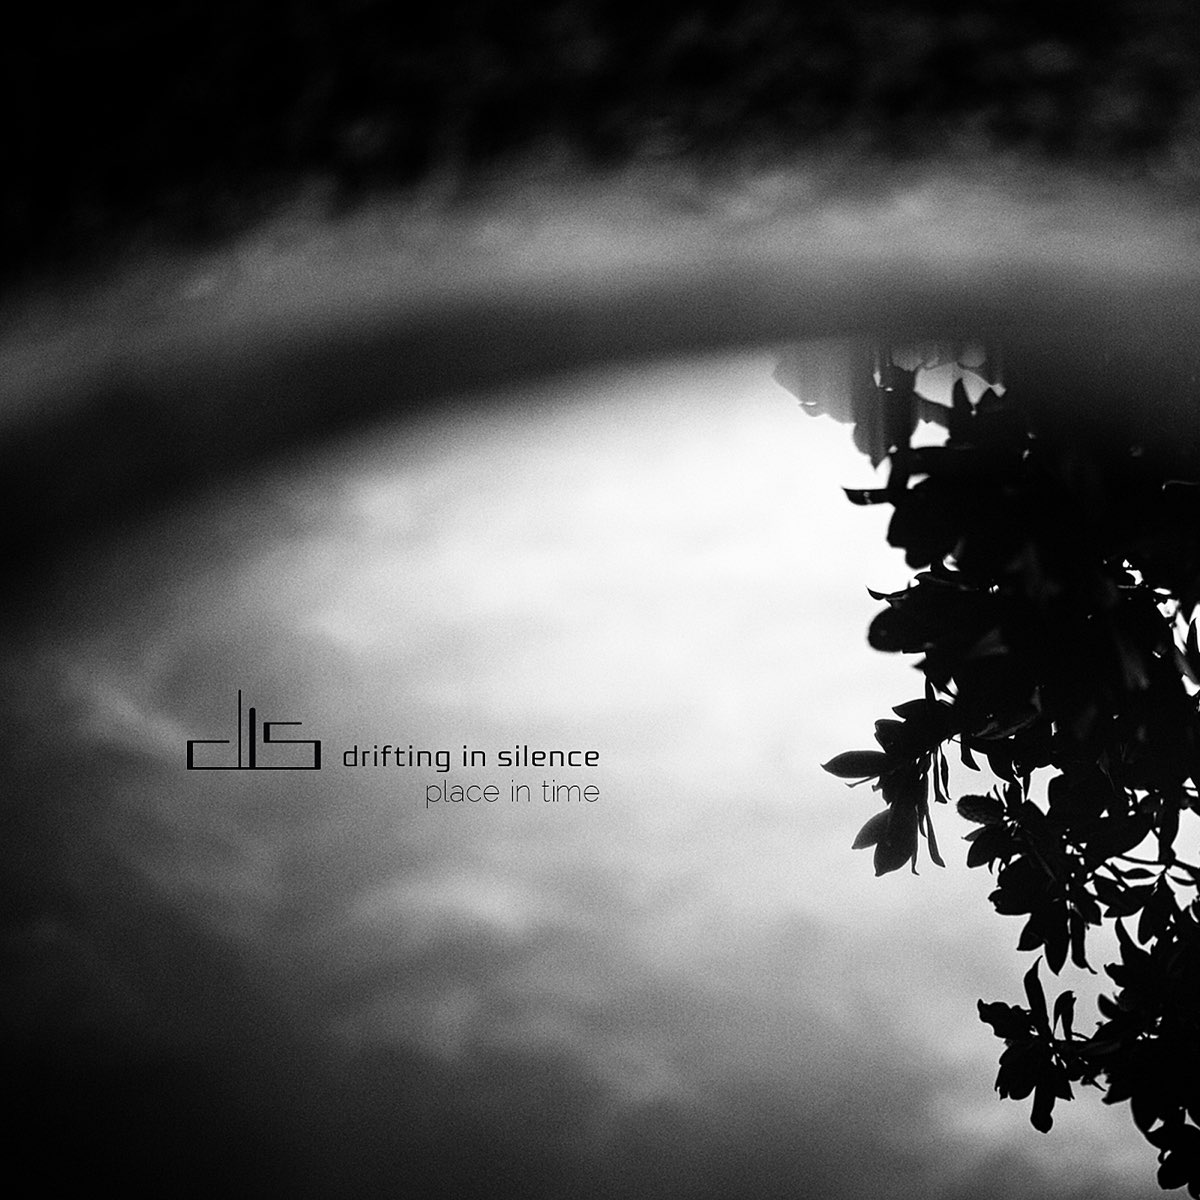 Негр in Silence. Silent place. The caretaker - Drifting time misplaced.